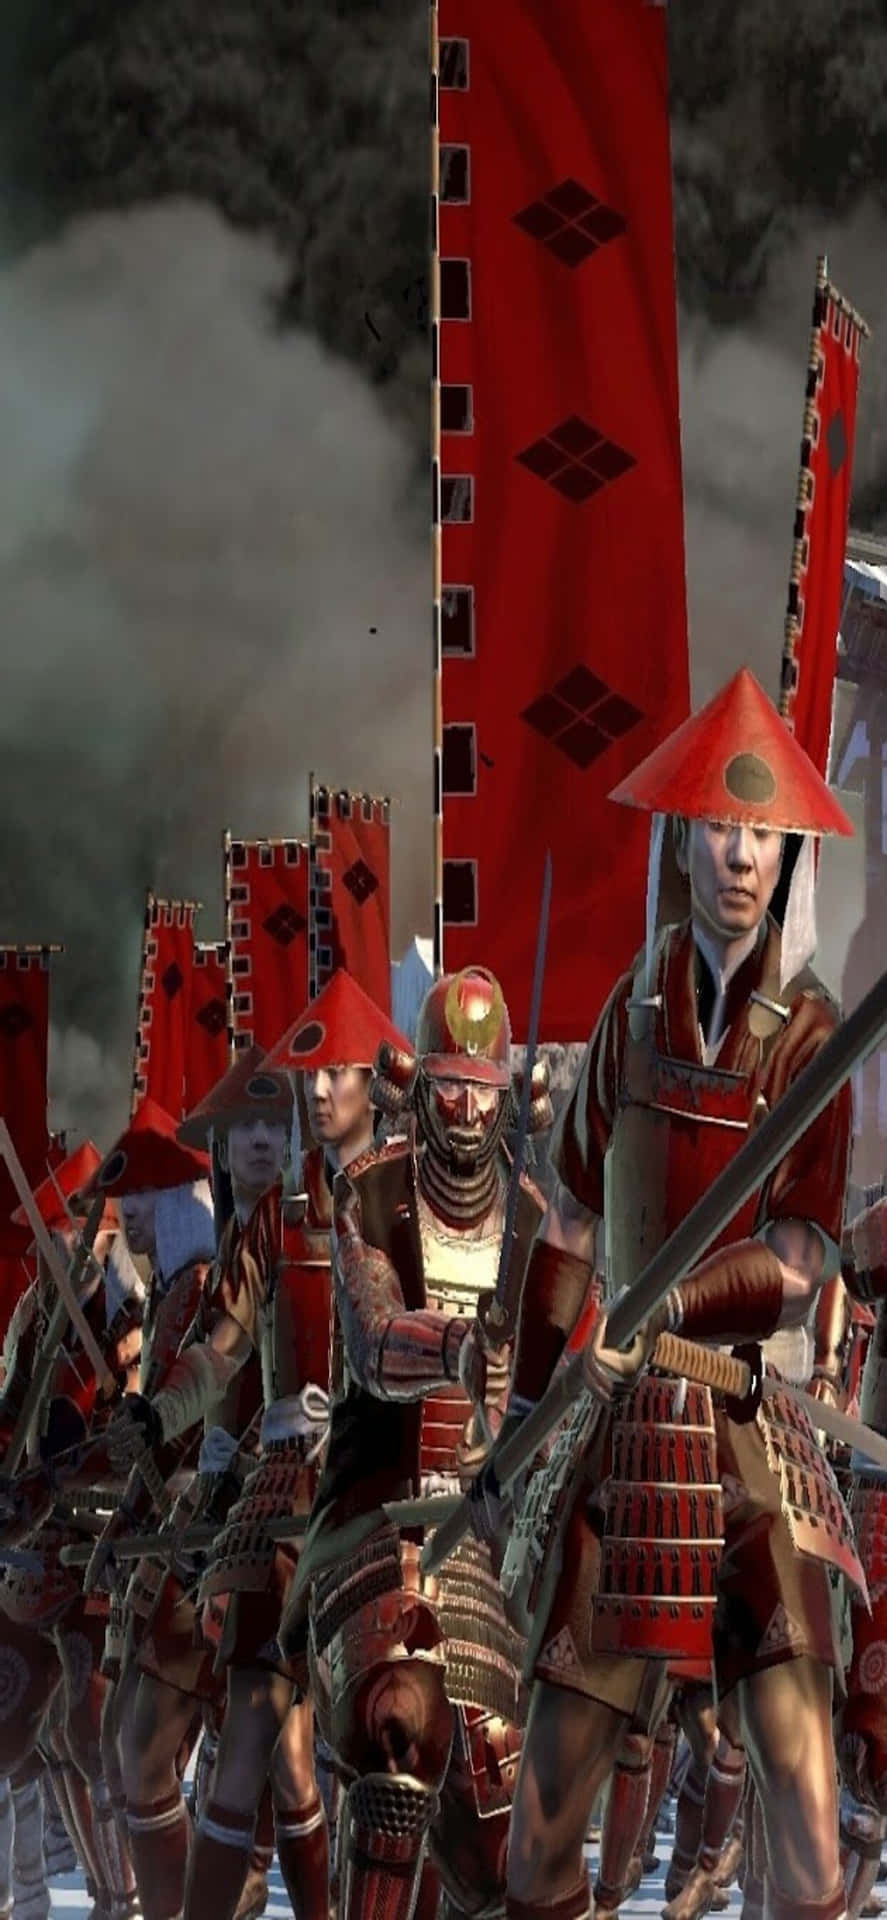 Play Total War Shogun 2 on your Iphone Xs Max